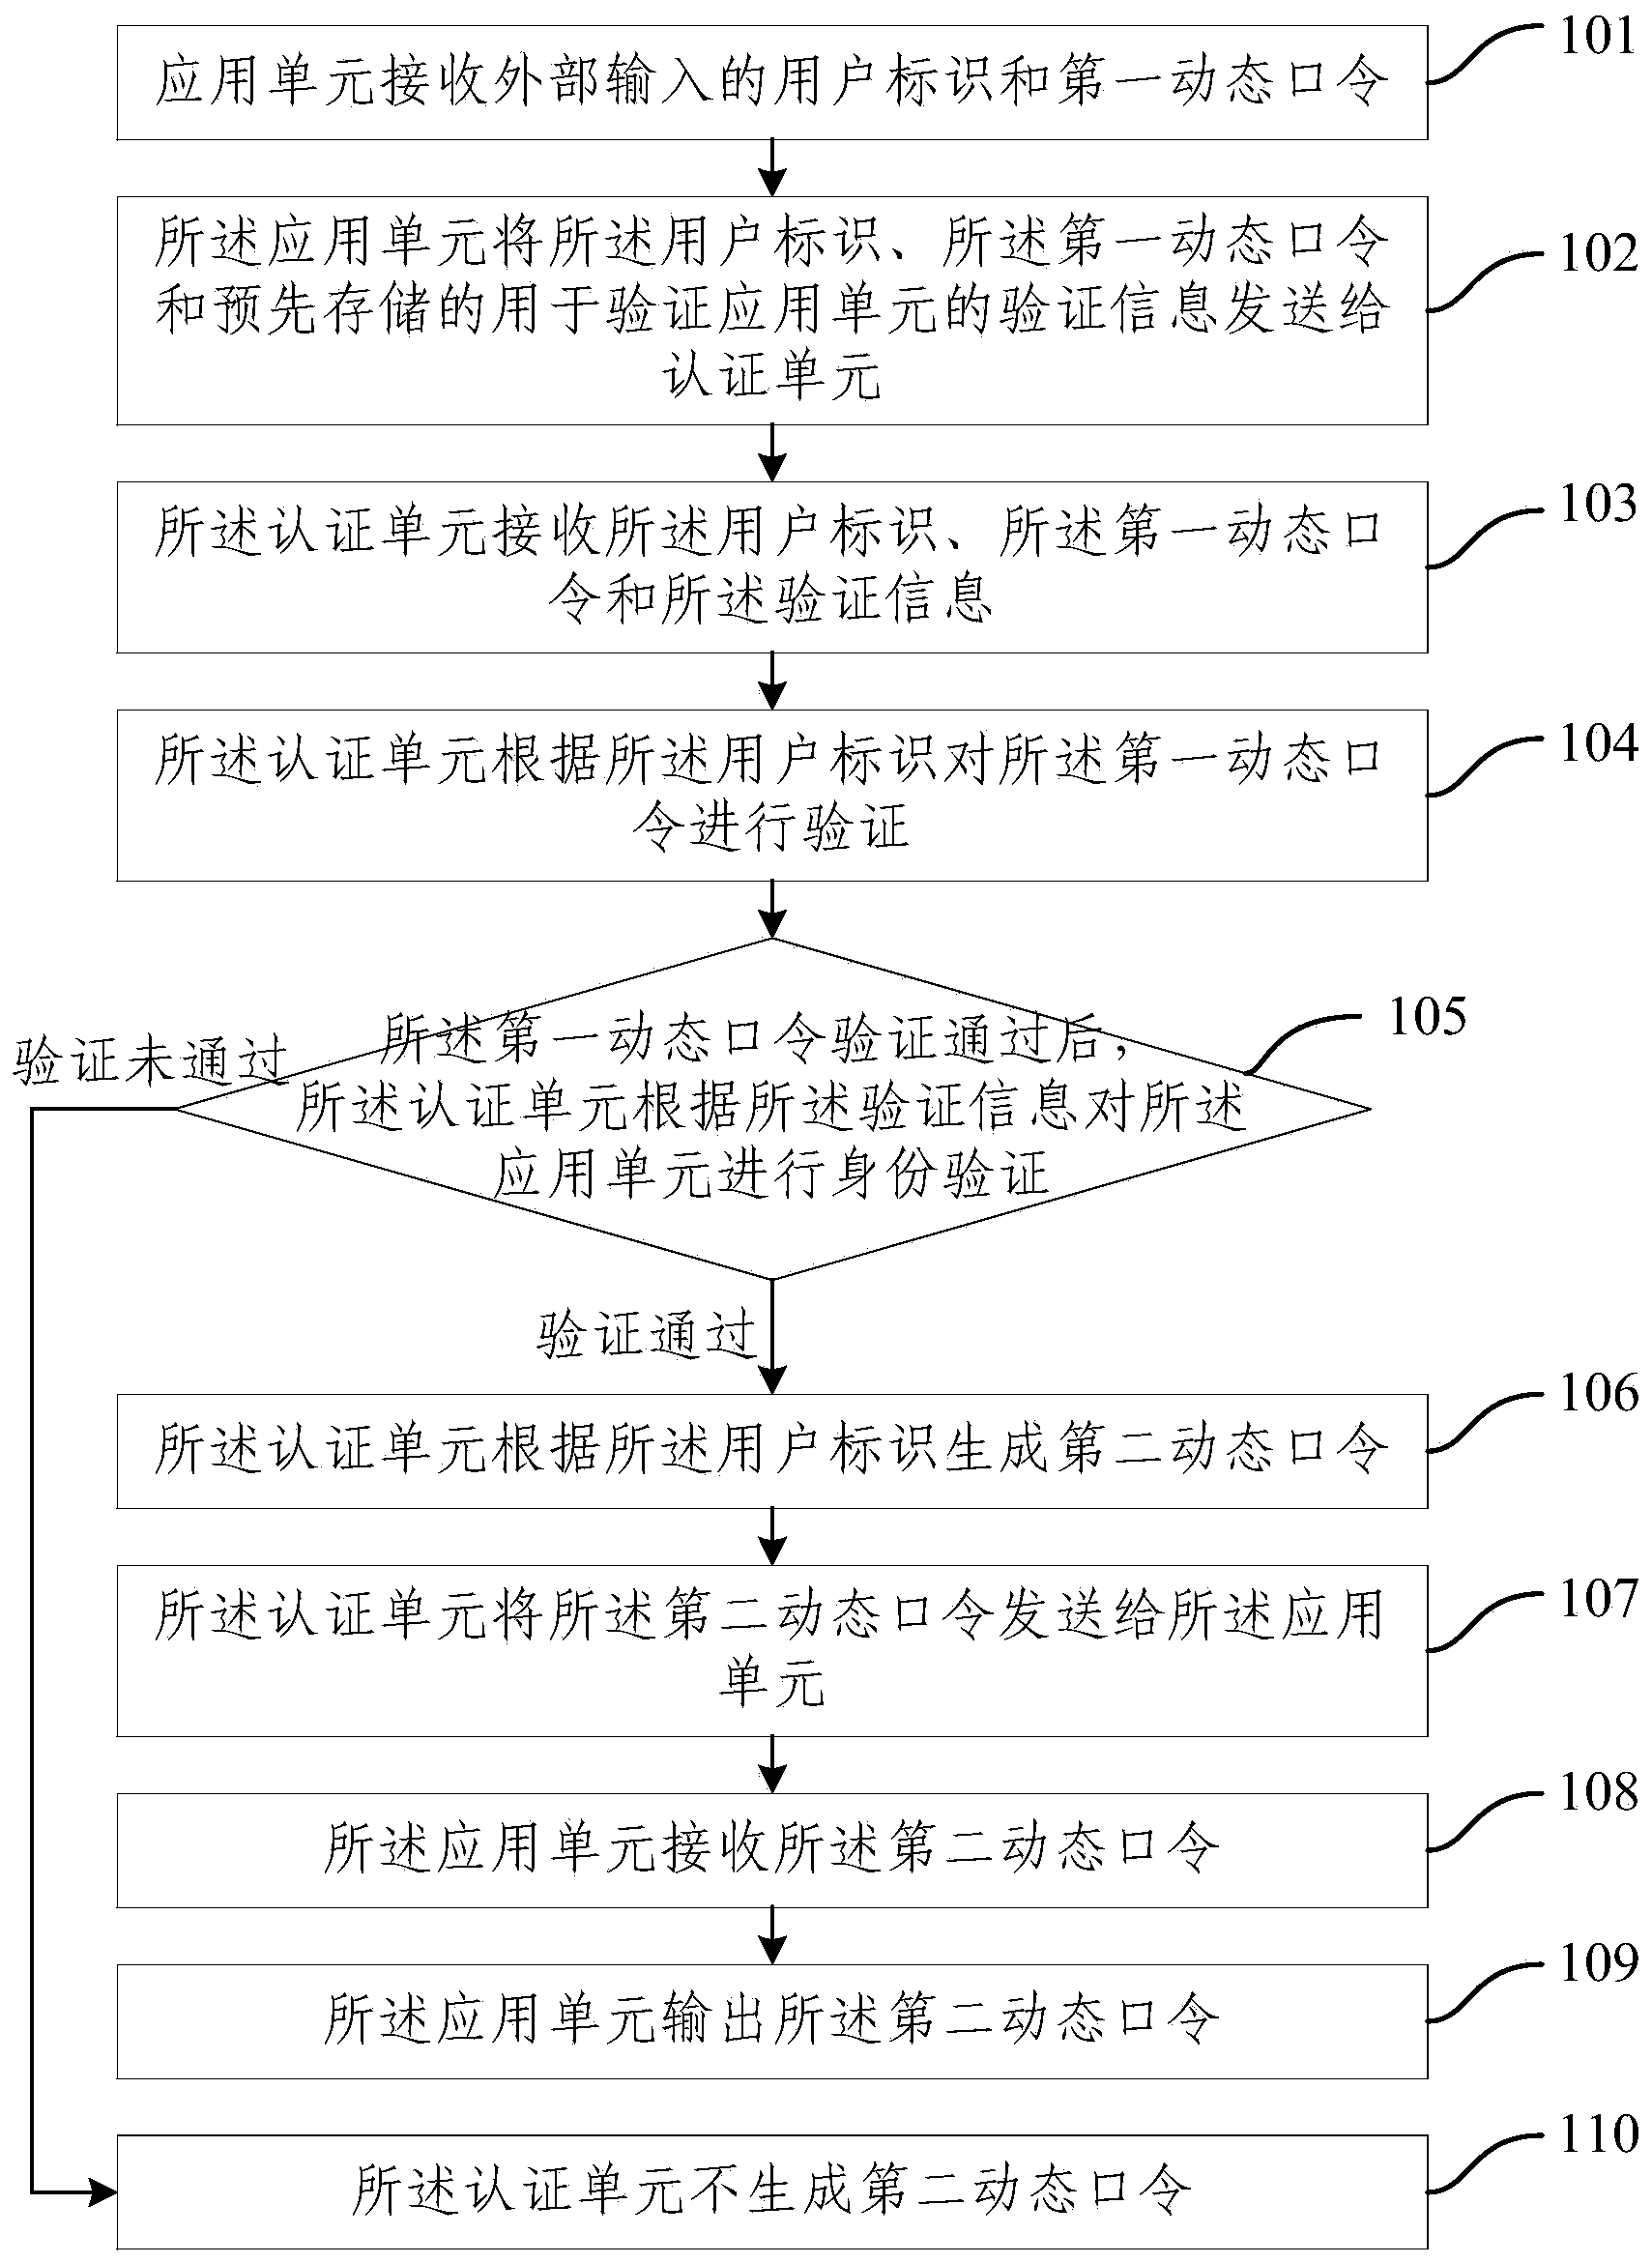 Two-way identity authentication method and system based on dynamic passwords